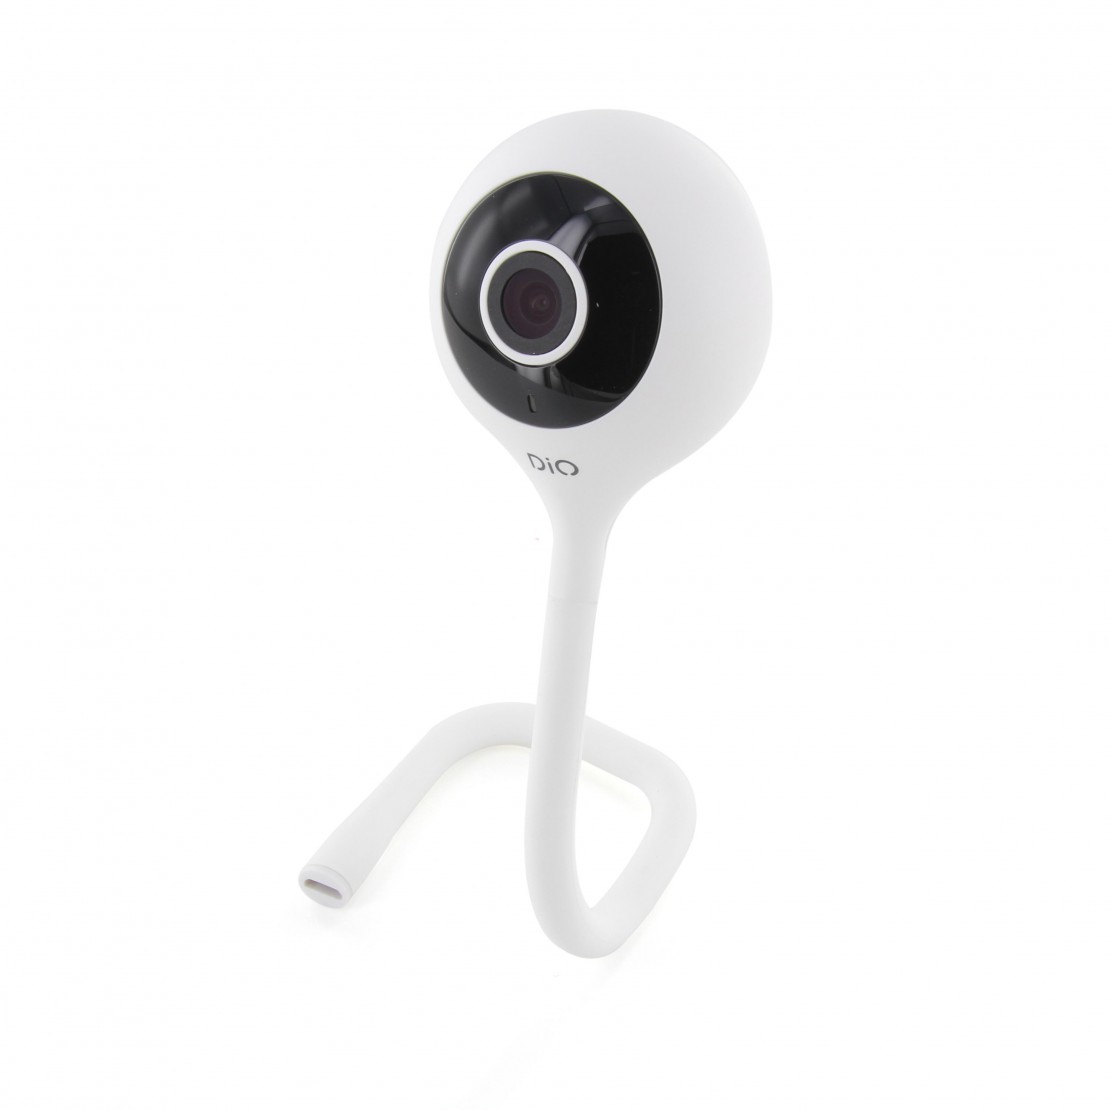 Wi-Fi HD camera with sound detection